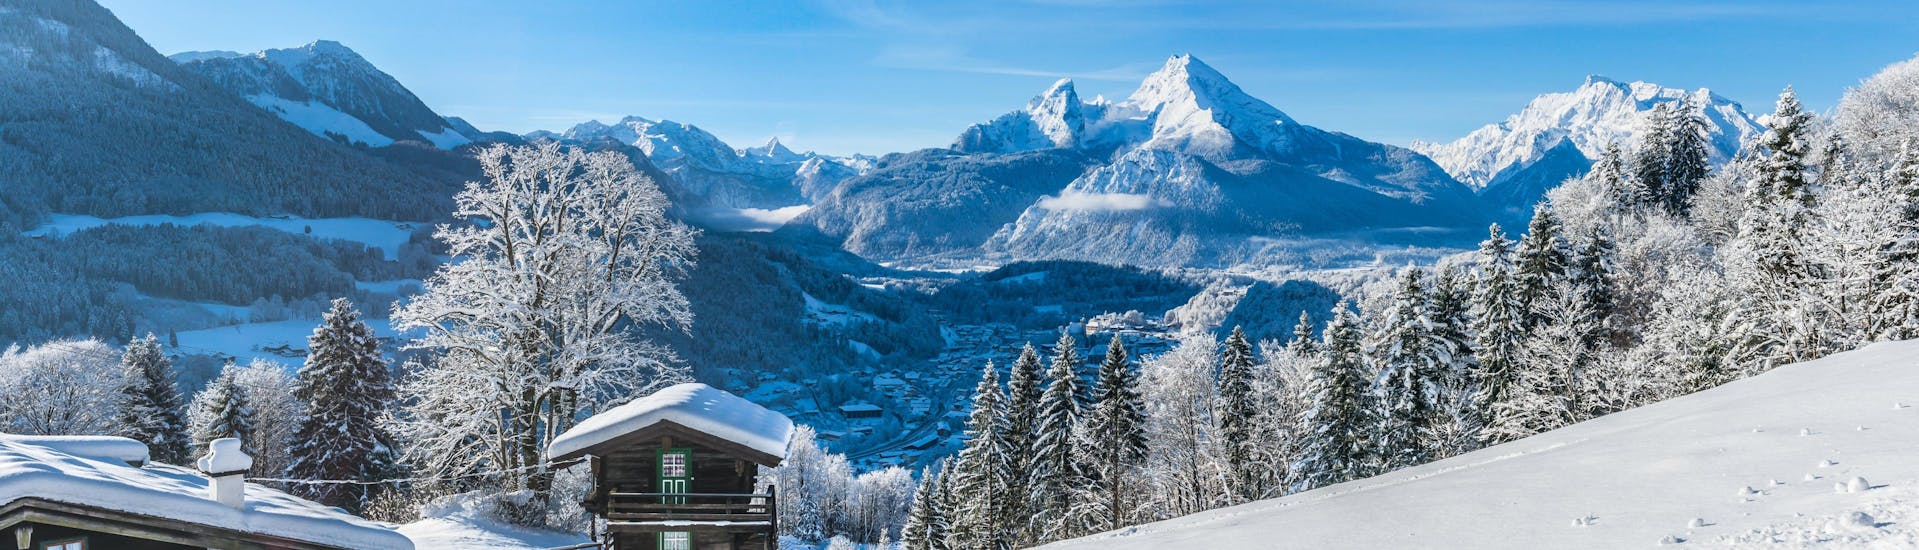 A view of the dreamly winter landscape near Bischofswiesen - Götschen in Berchtesgadener Land, a popular region in Germany where visitors can books ski lessons with one of the local ski schools.